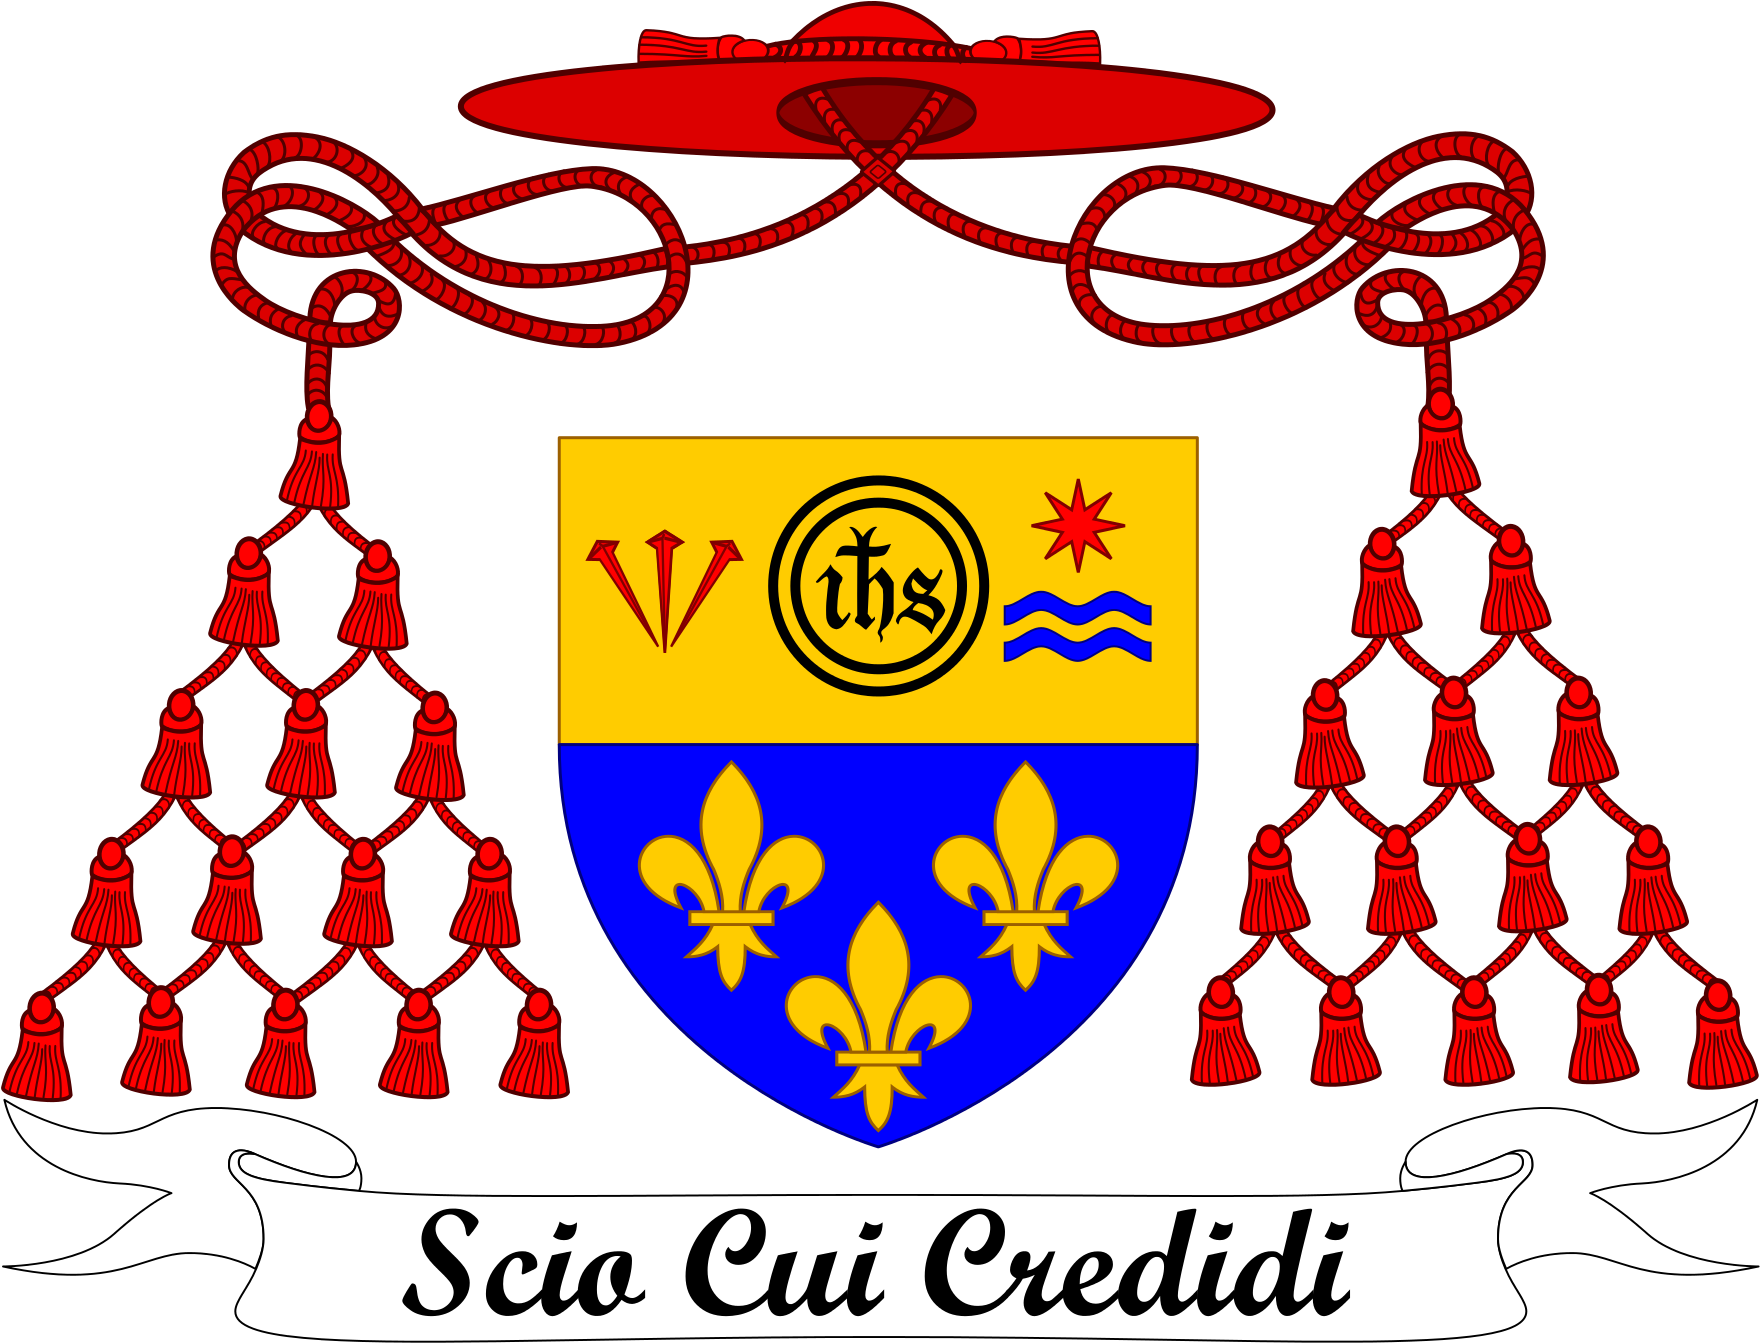 Coat Of Arms Of Cardinal Avery Dulles - Jean Louis Coat Of Arms (1759x1388)